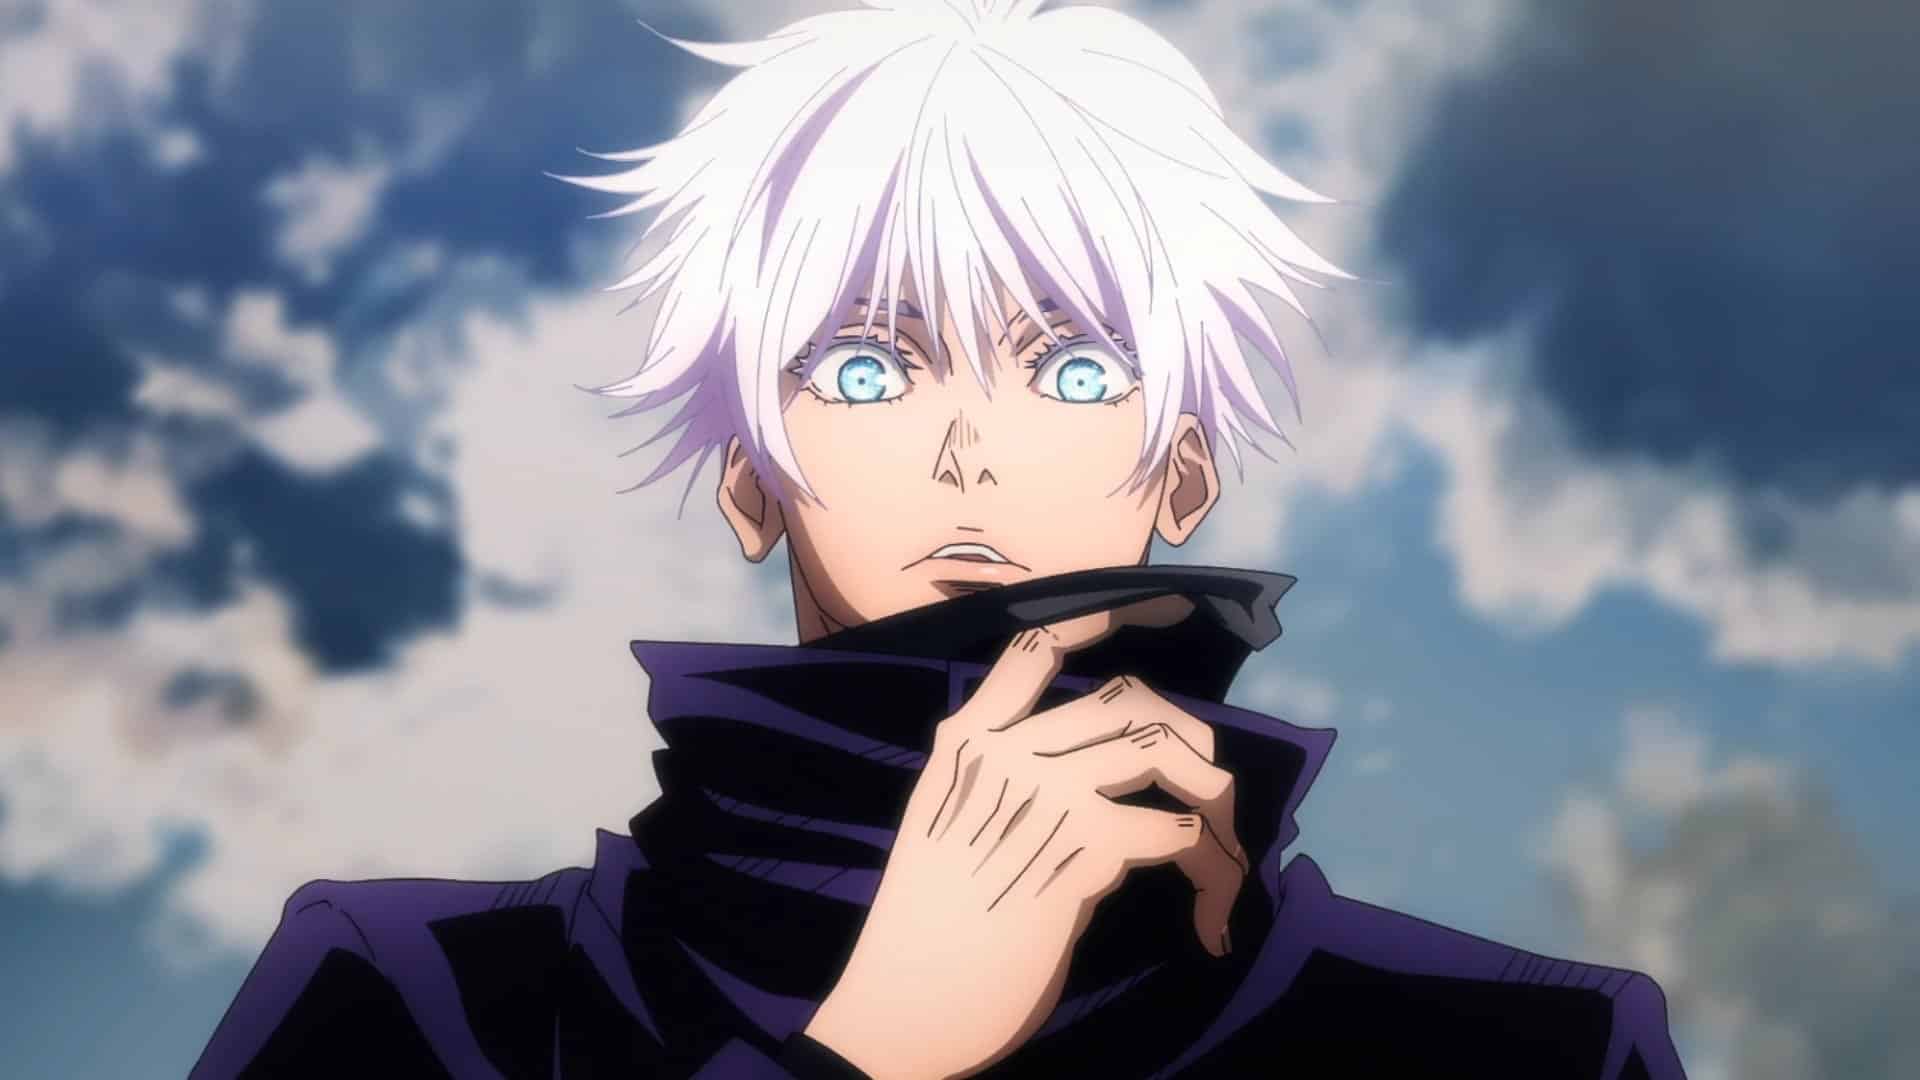 Top 25 Most Popular White Hair Anime Characters Of All Time